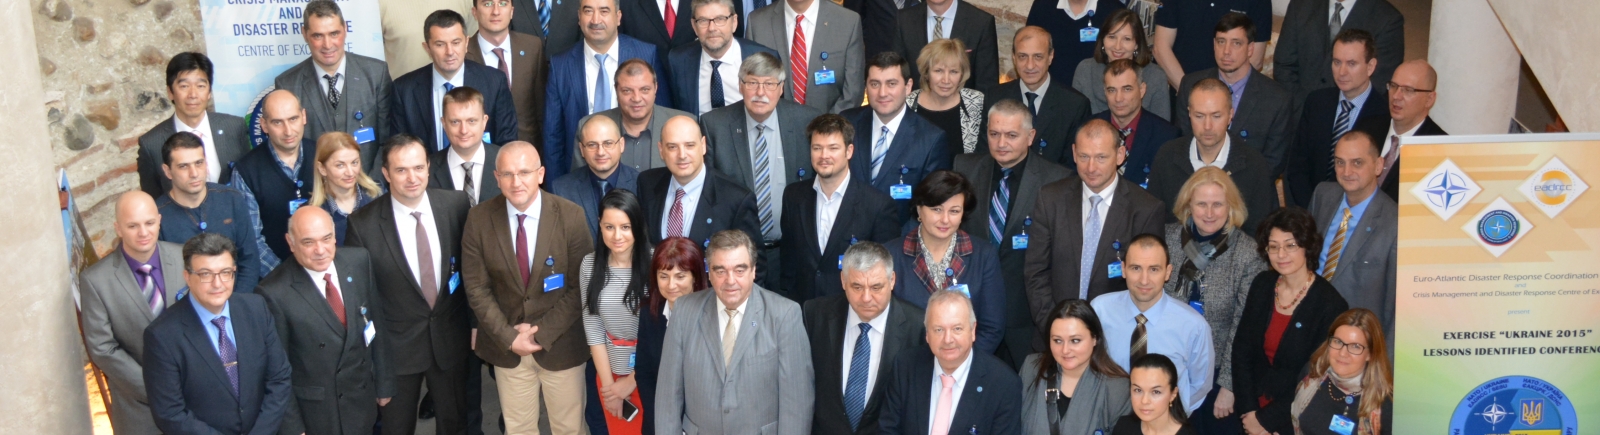 LESSONS IDENTIFIED CONFERENCE FOR EADRCC EXERCISE UKRAINE 2015 TAKES PLACE IN SOFIA, BULGARIA